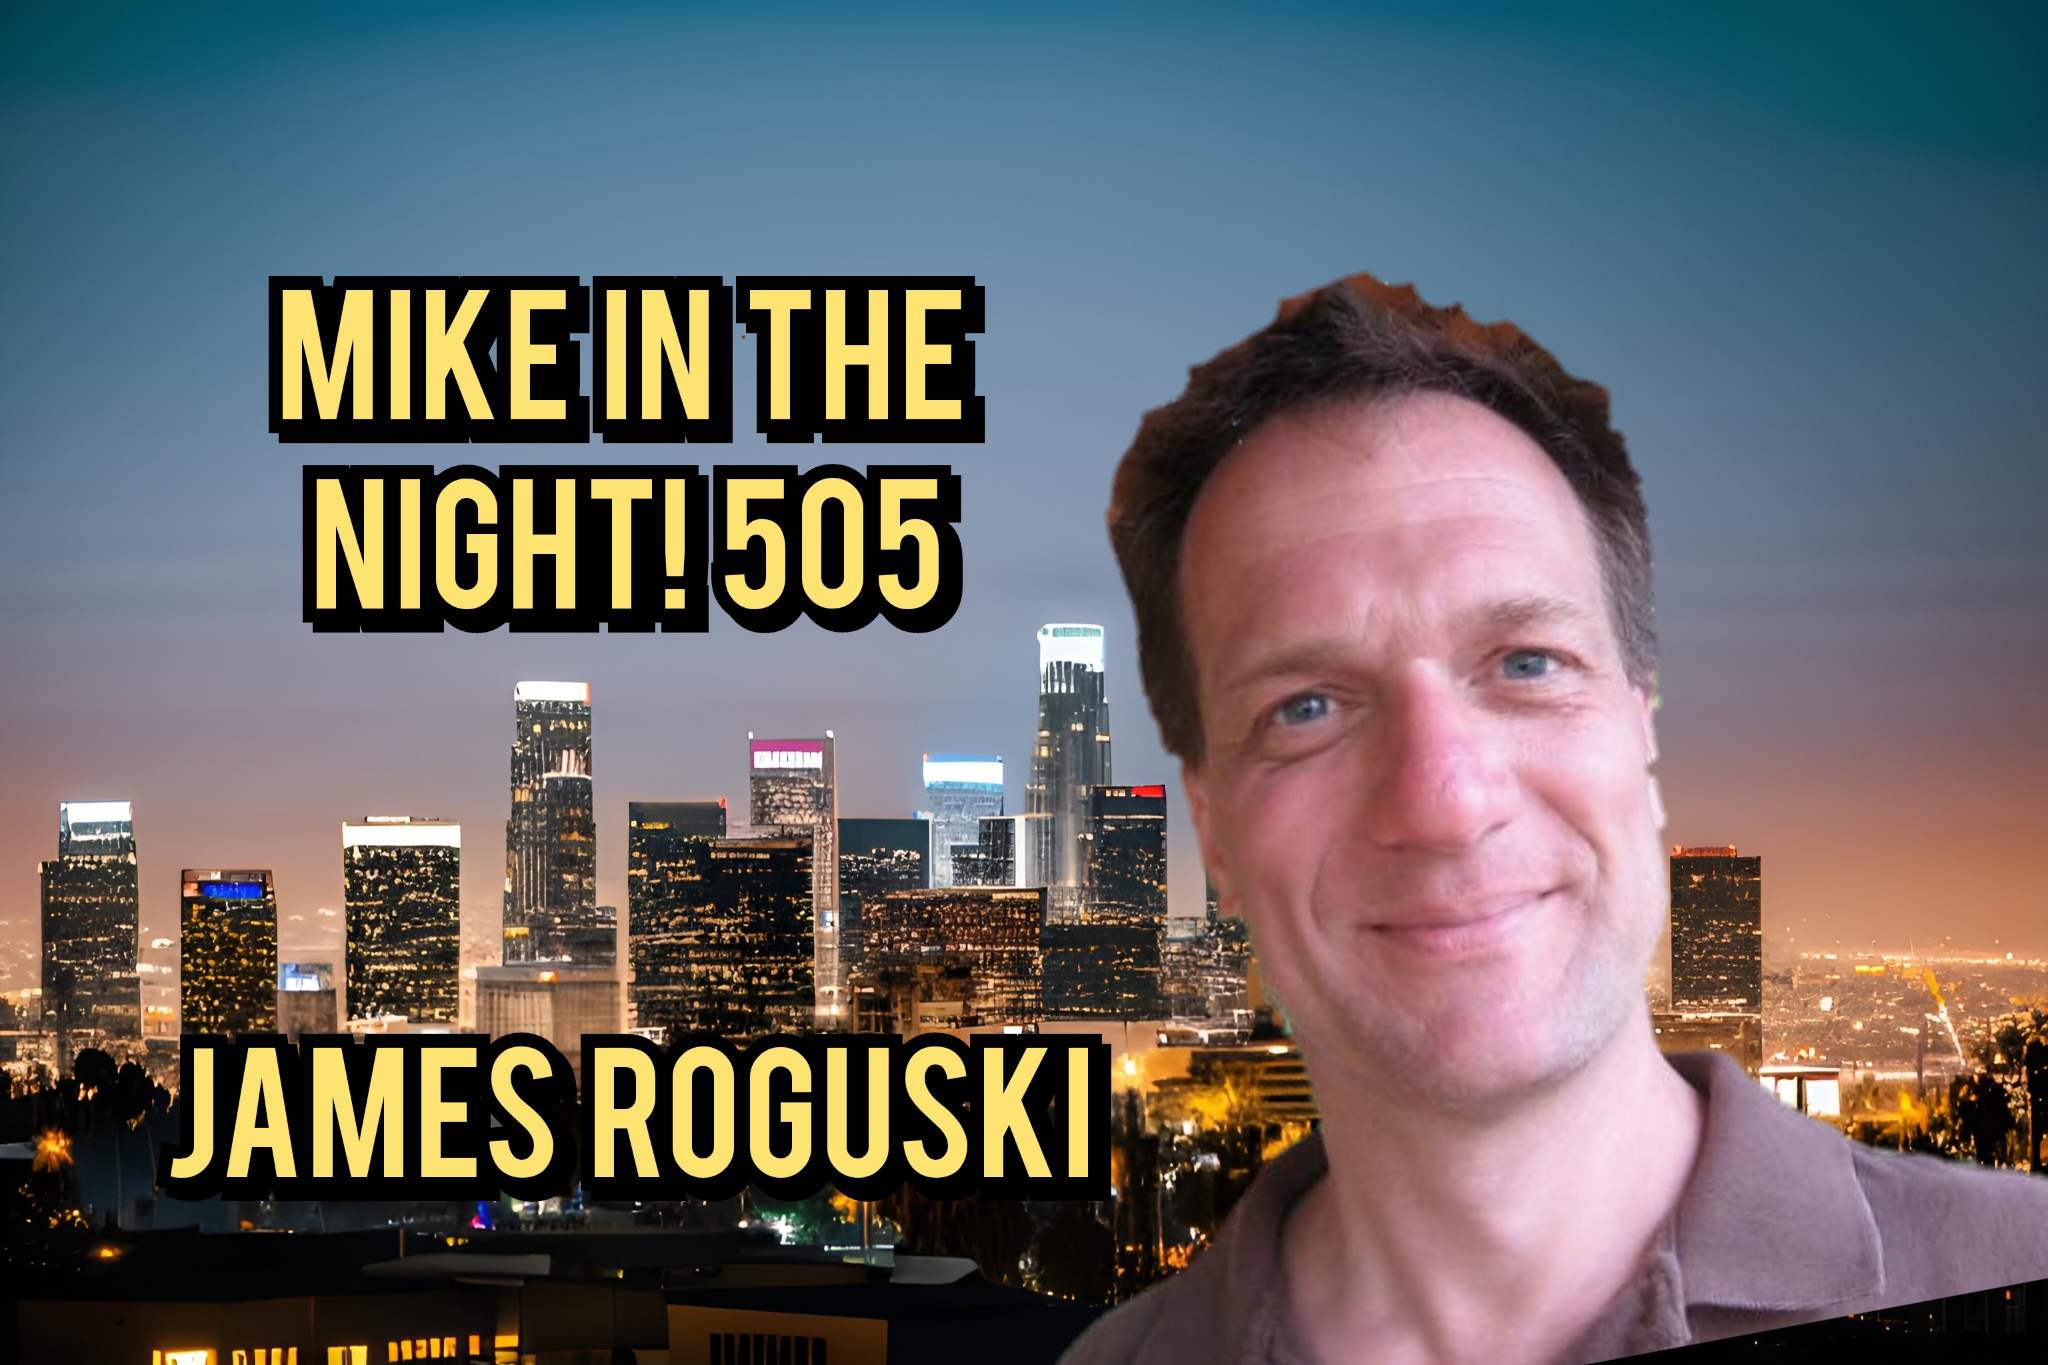 James Roguski Joins Mike in the Night: A Thought-Provoking Discussion on Silent Laws and Global Treaties